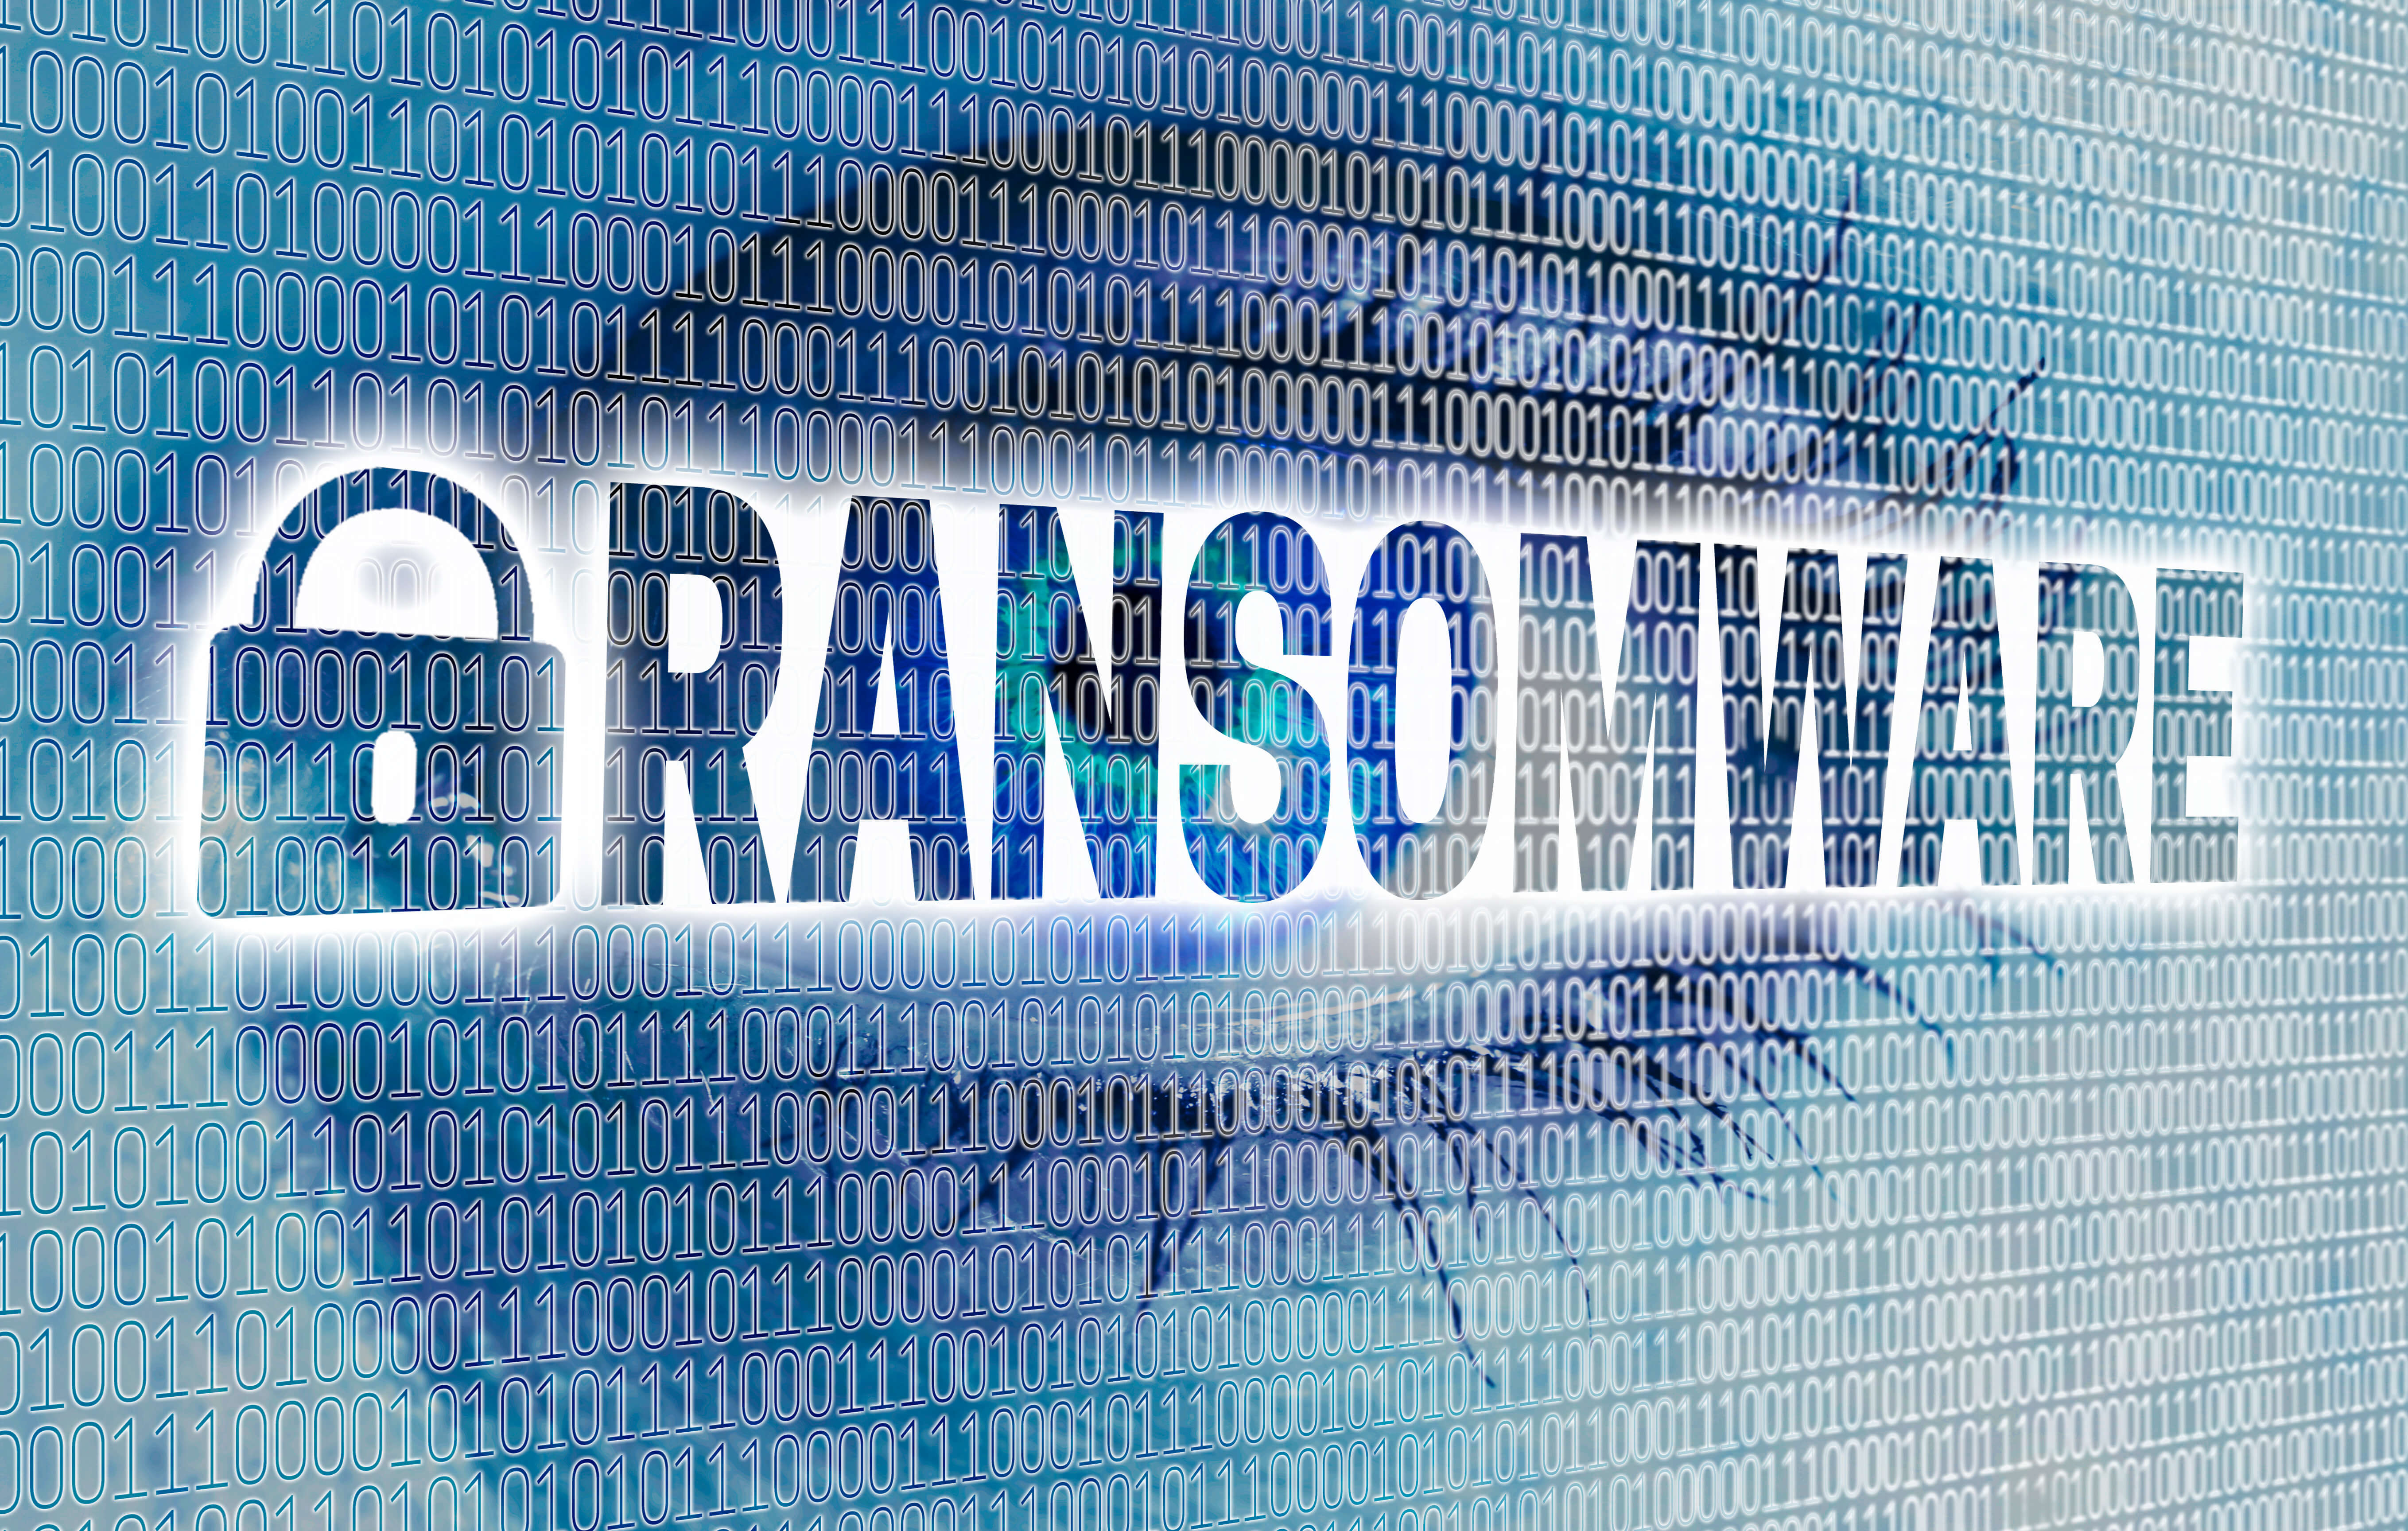 Ransomware tabletop exercises and why you can’t ignore them